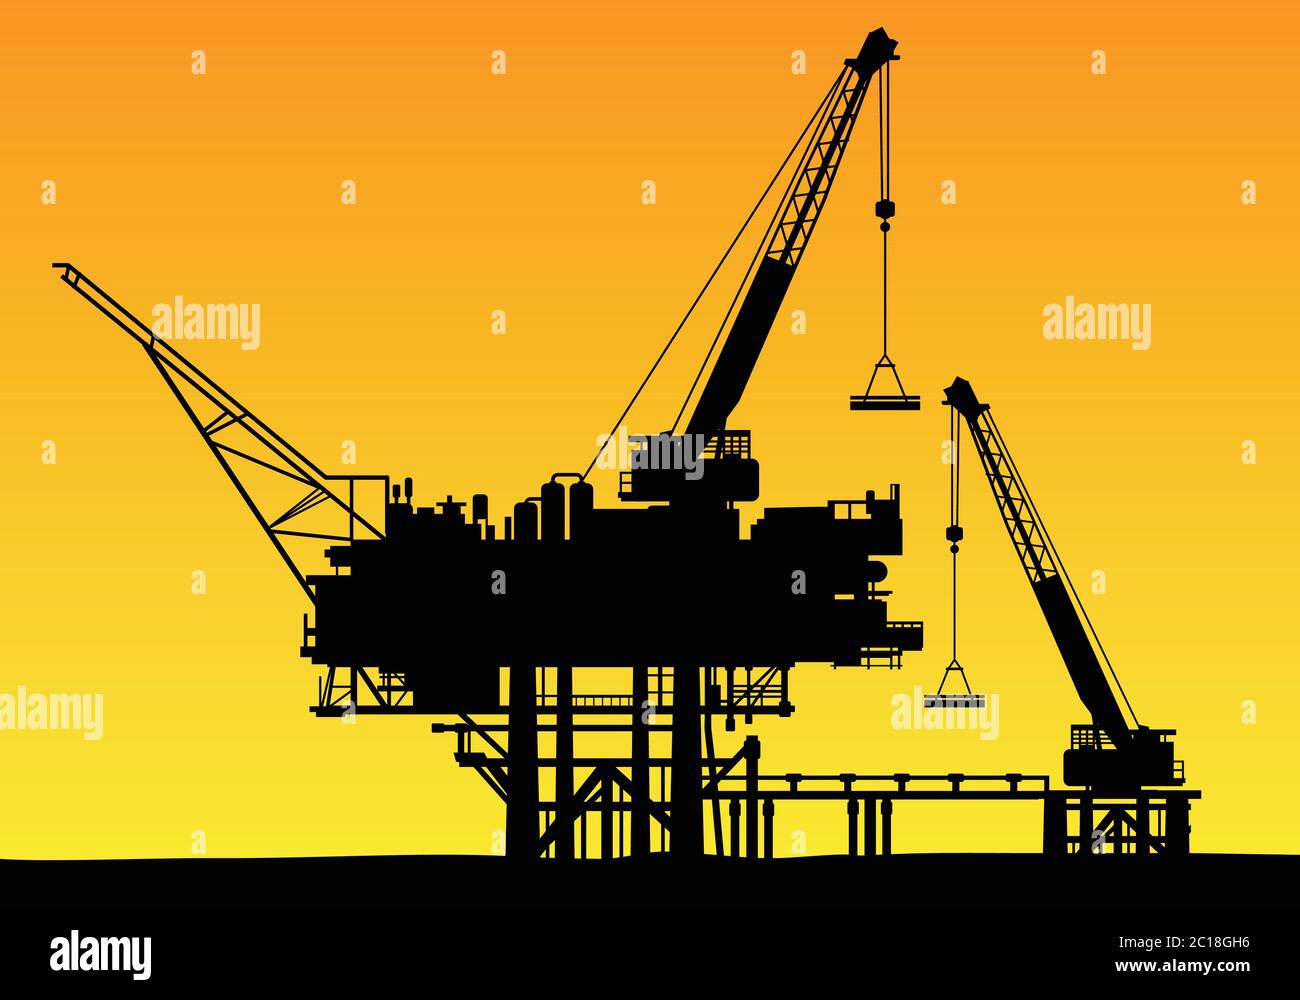 Offshore oil drilling installations with high crane machines. Suitable for design element of oil and gas company profile background template. Stock Vector